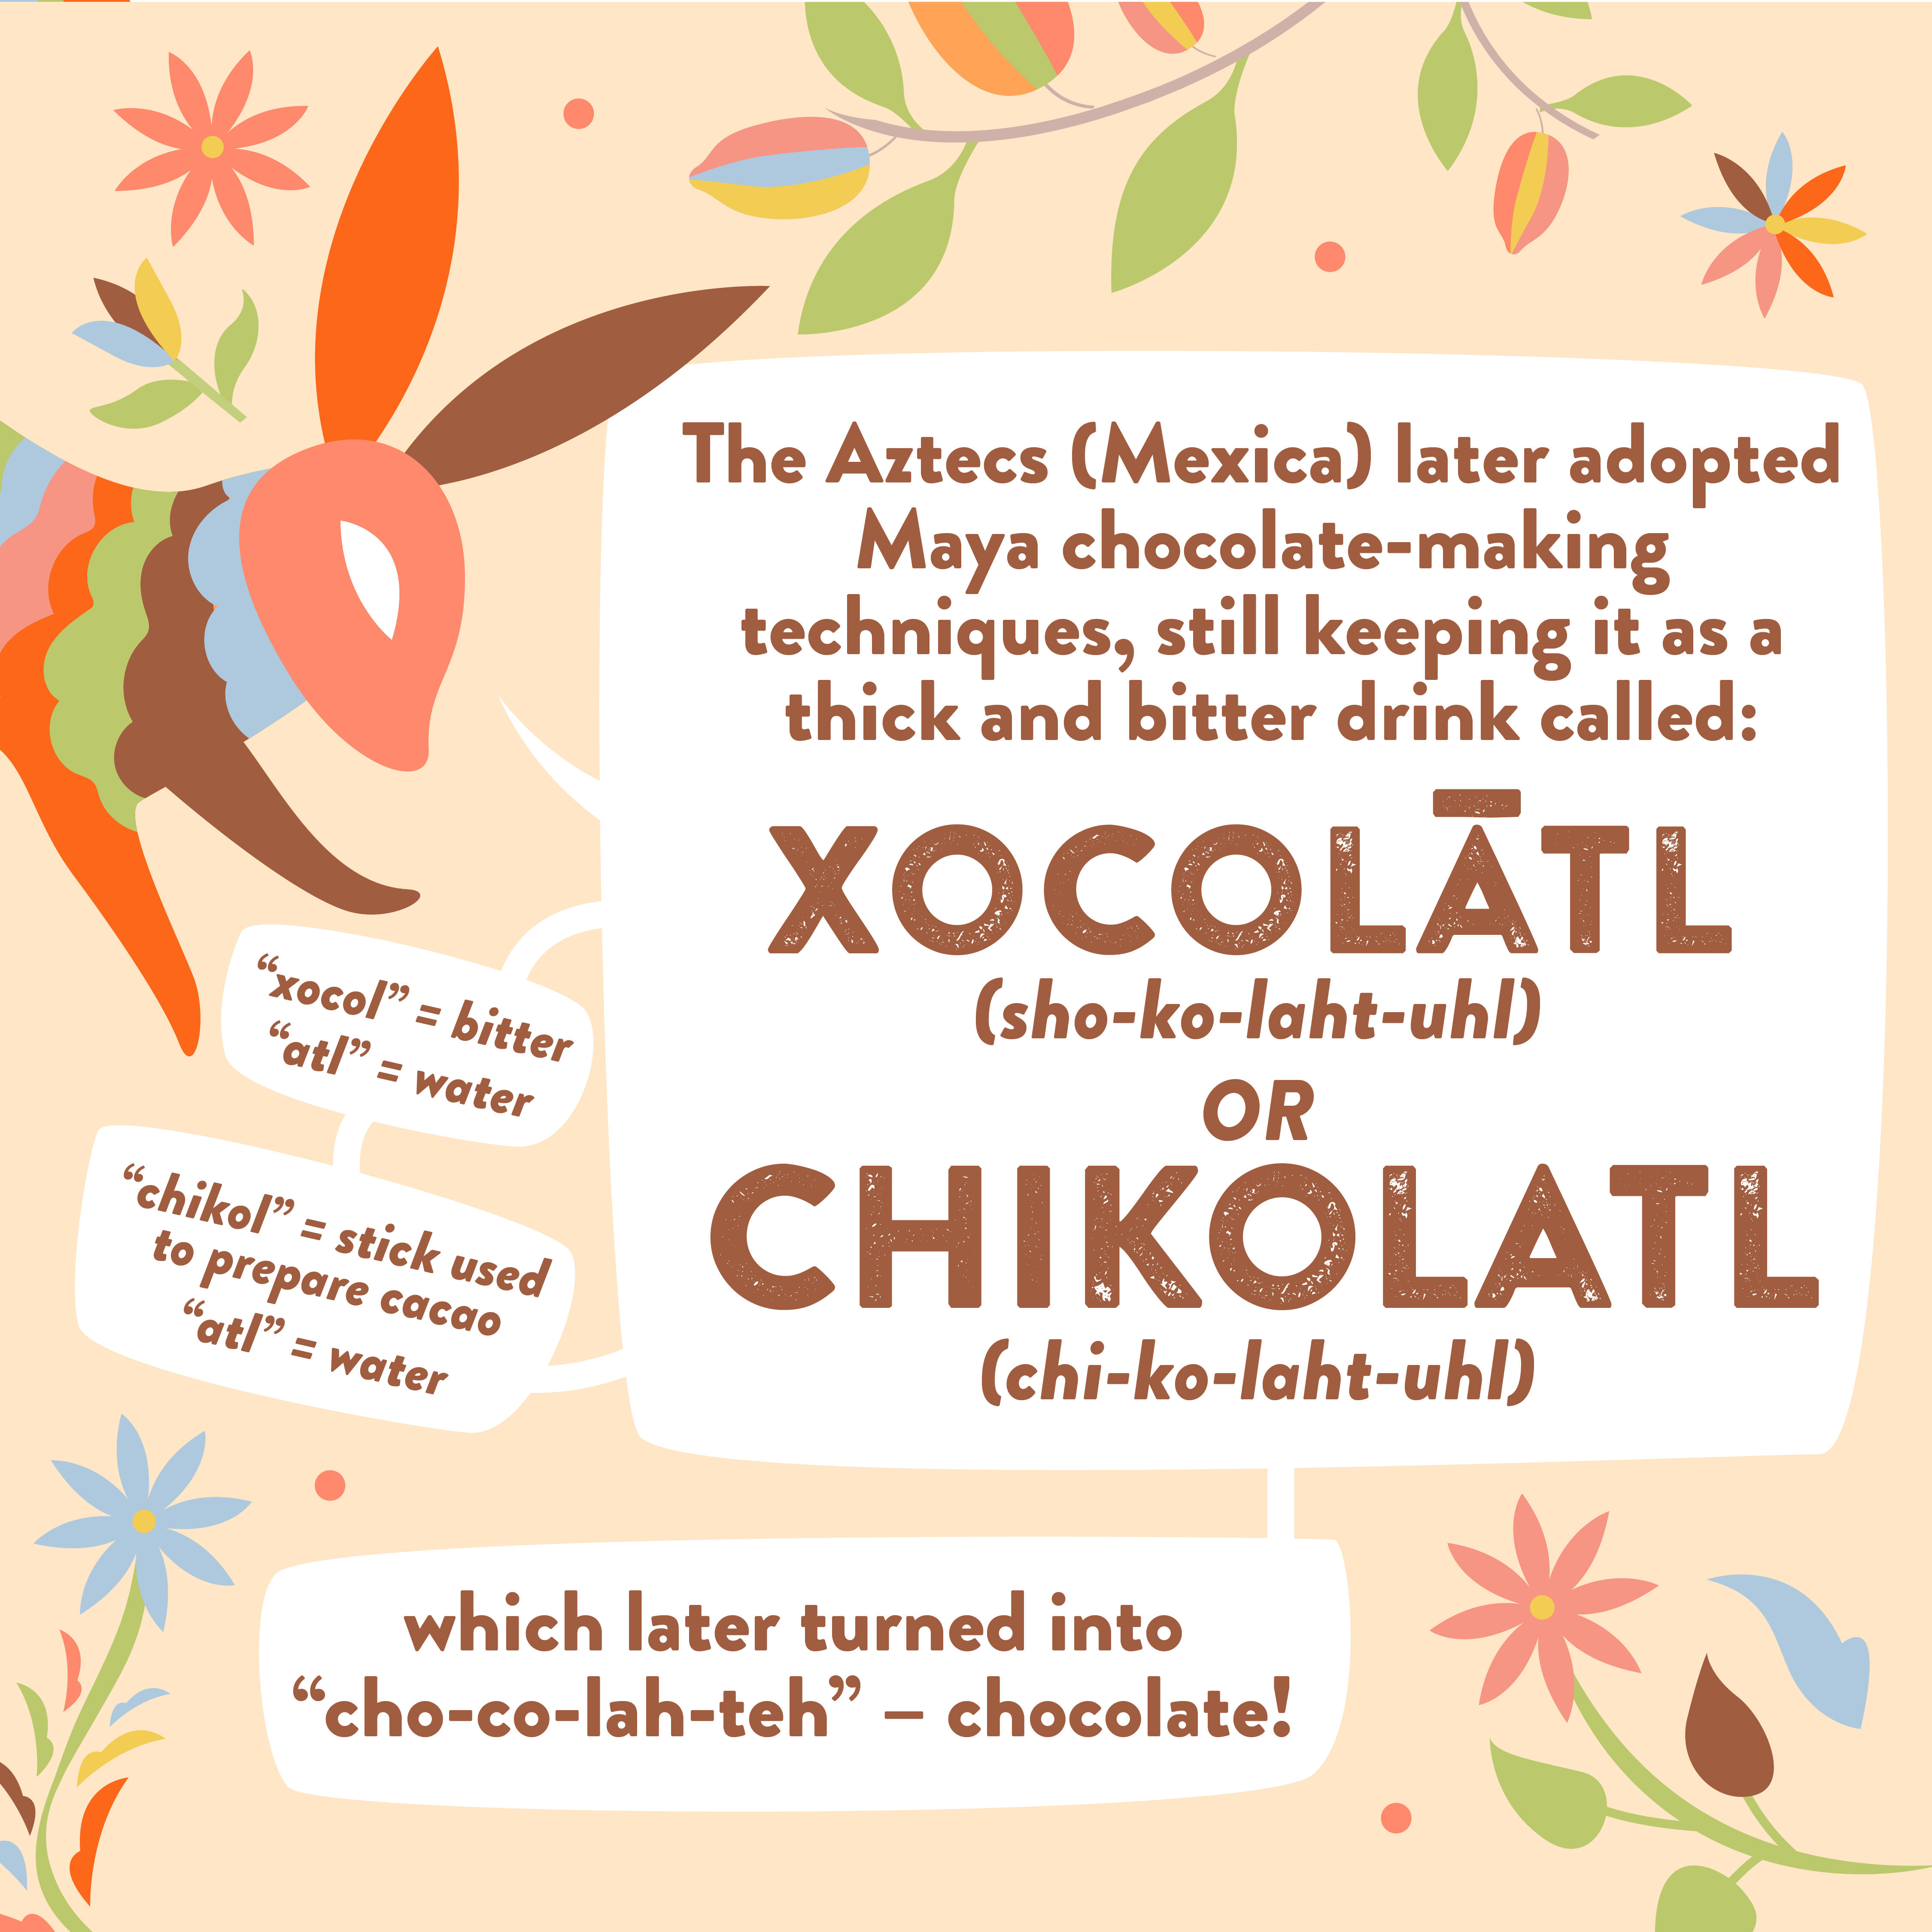 The history of chocolate, where does chocolate come from?